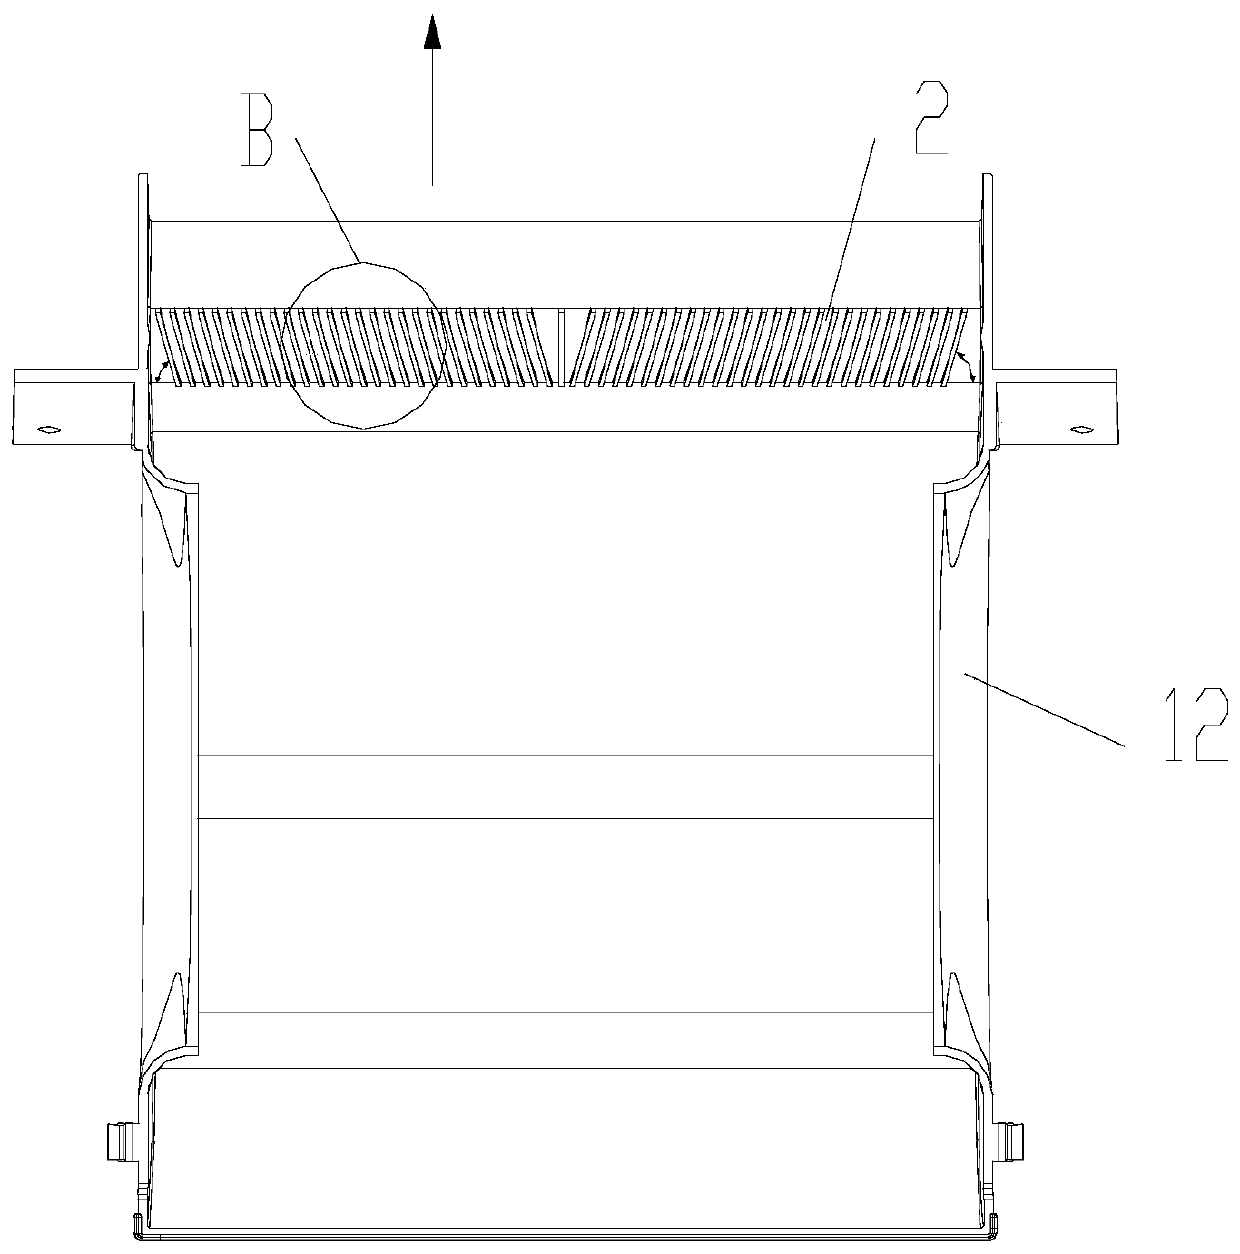 Volute and air conditioner with volute